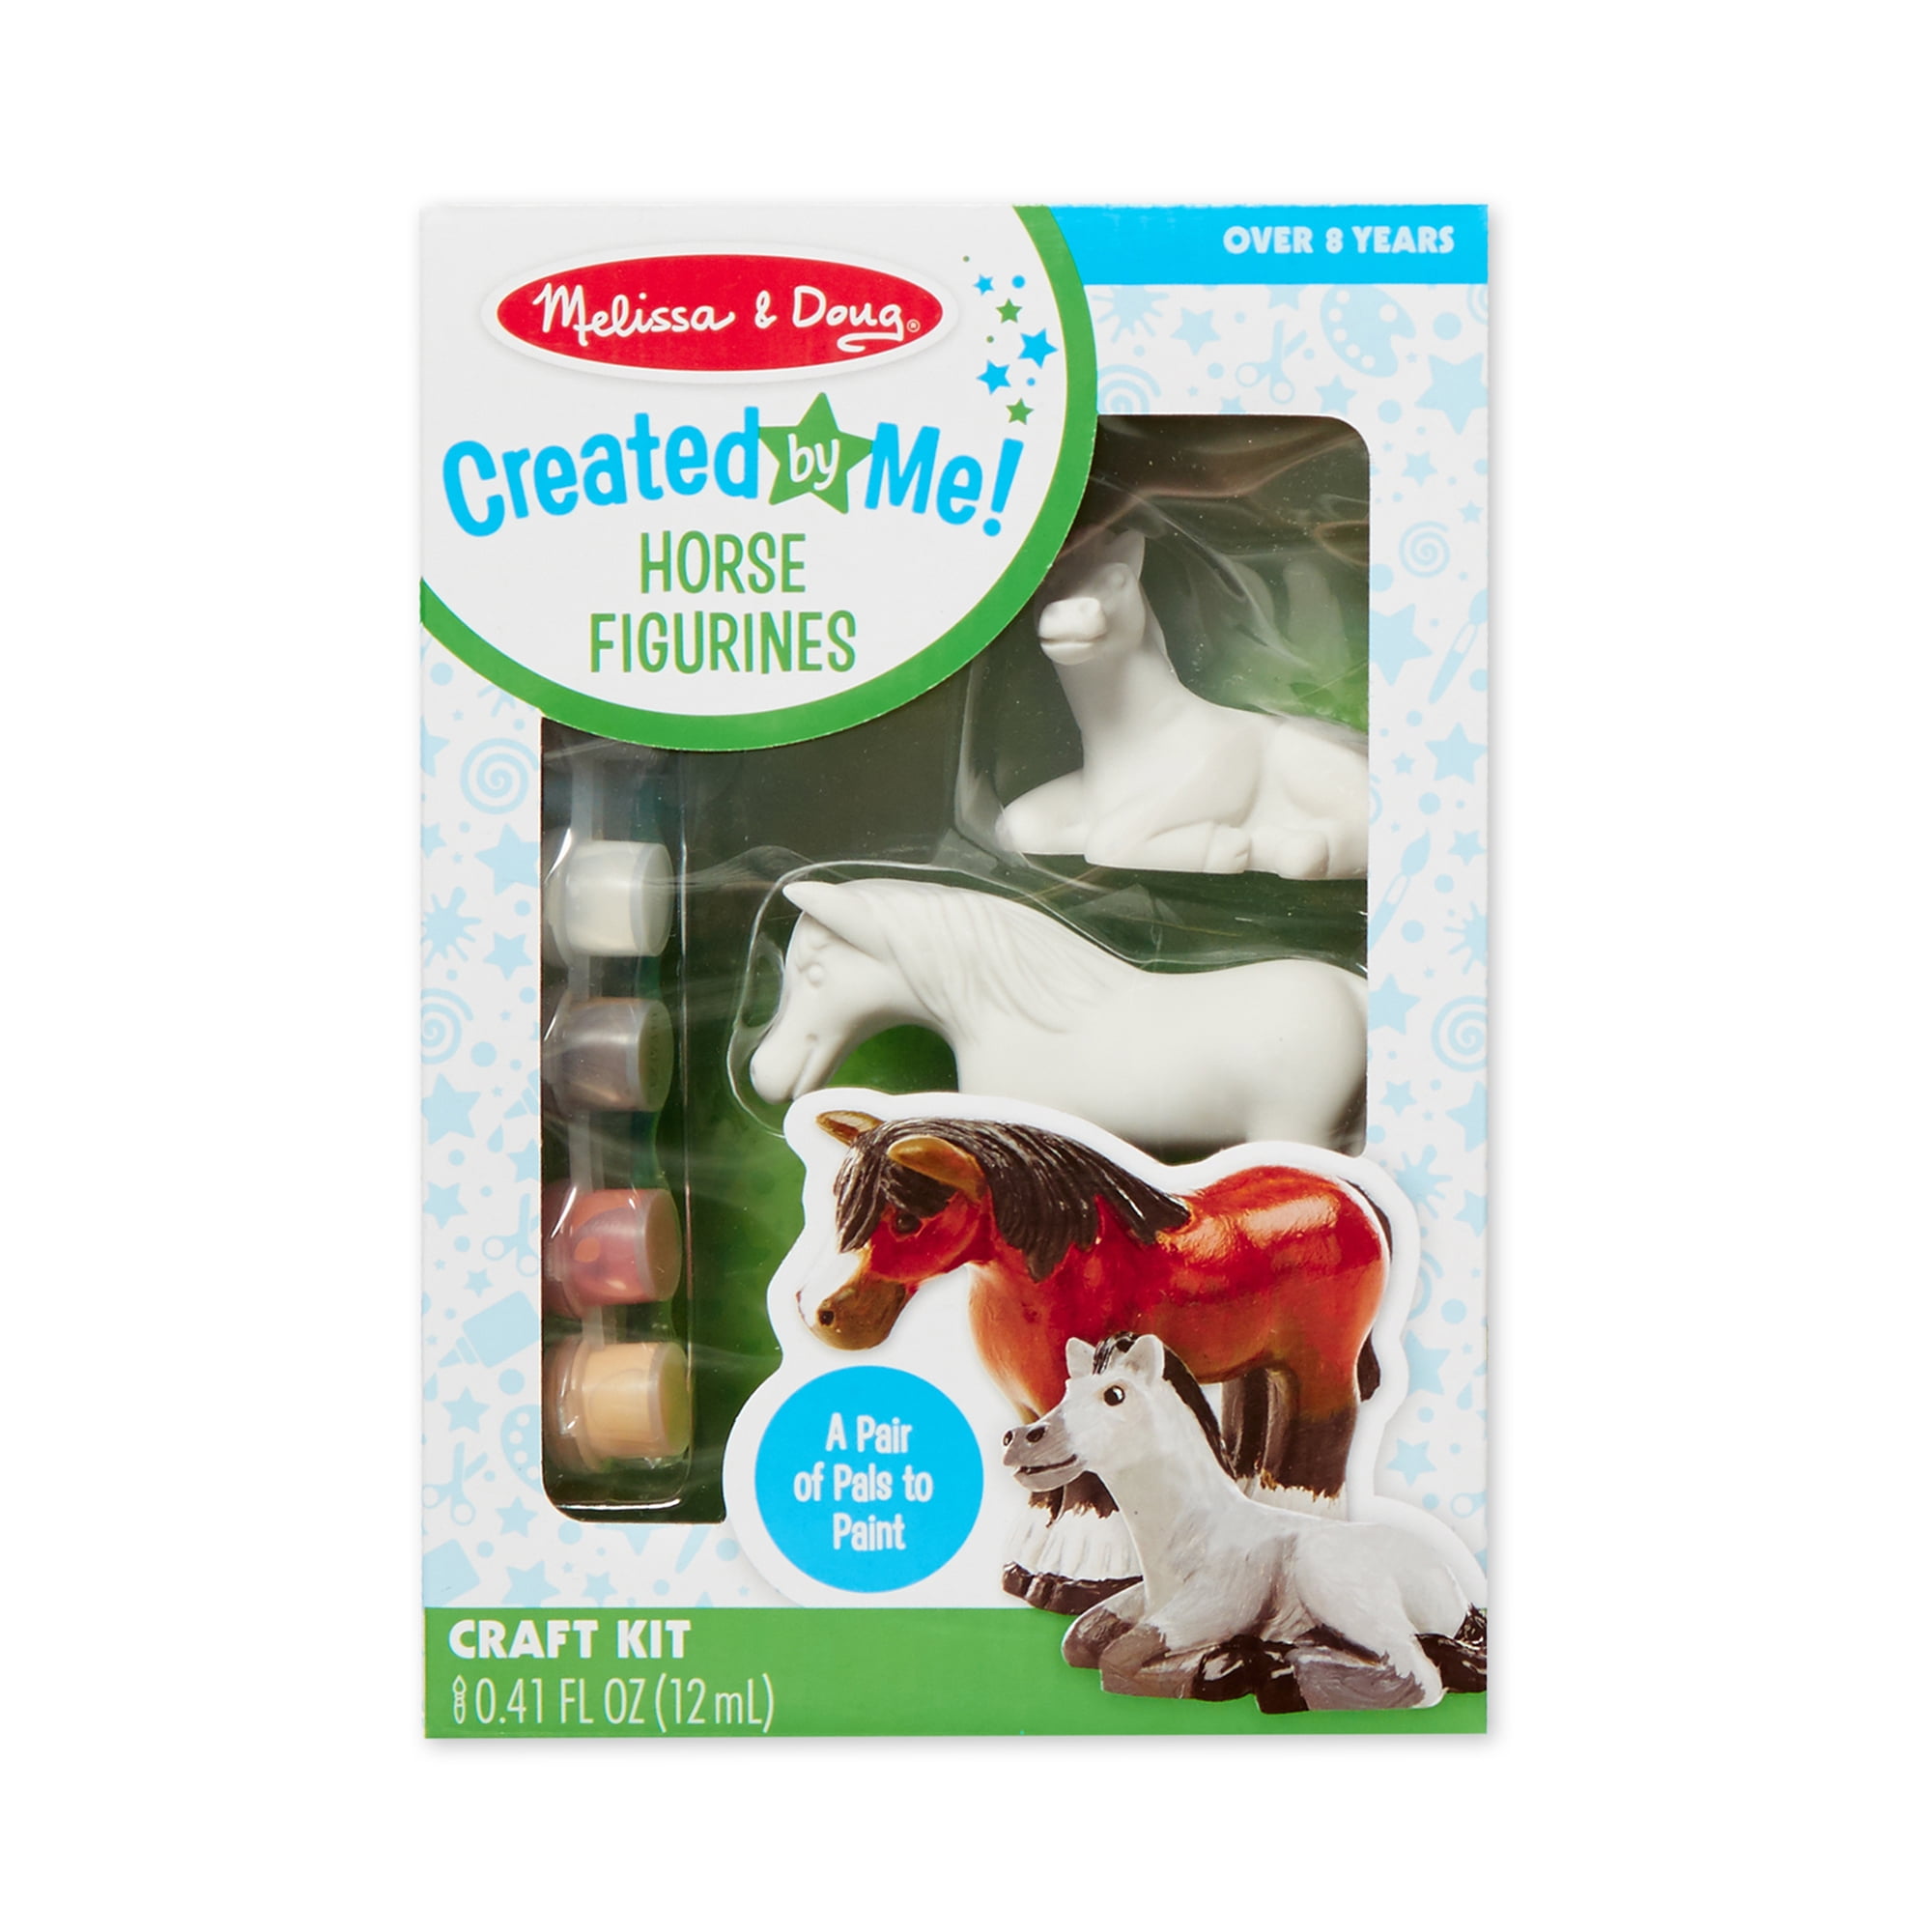 Melissa & Doug Created by Me! Pet Figurines Craft Kit (Resin Dog and Cat, 6  Paints, Paintbrush)